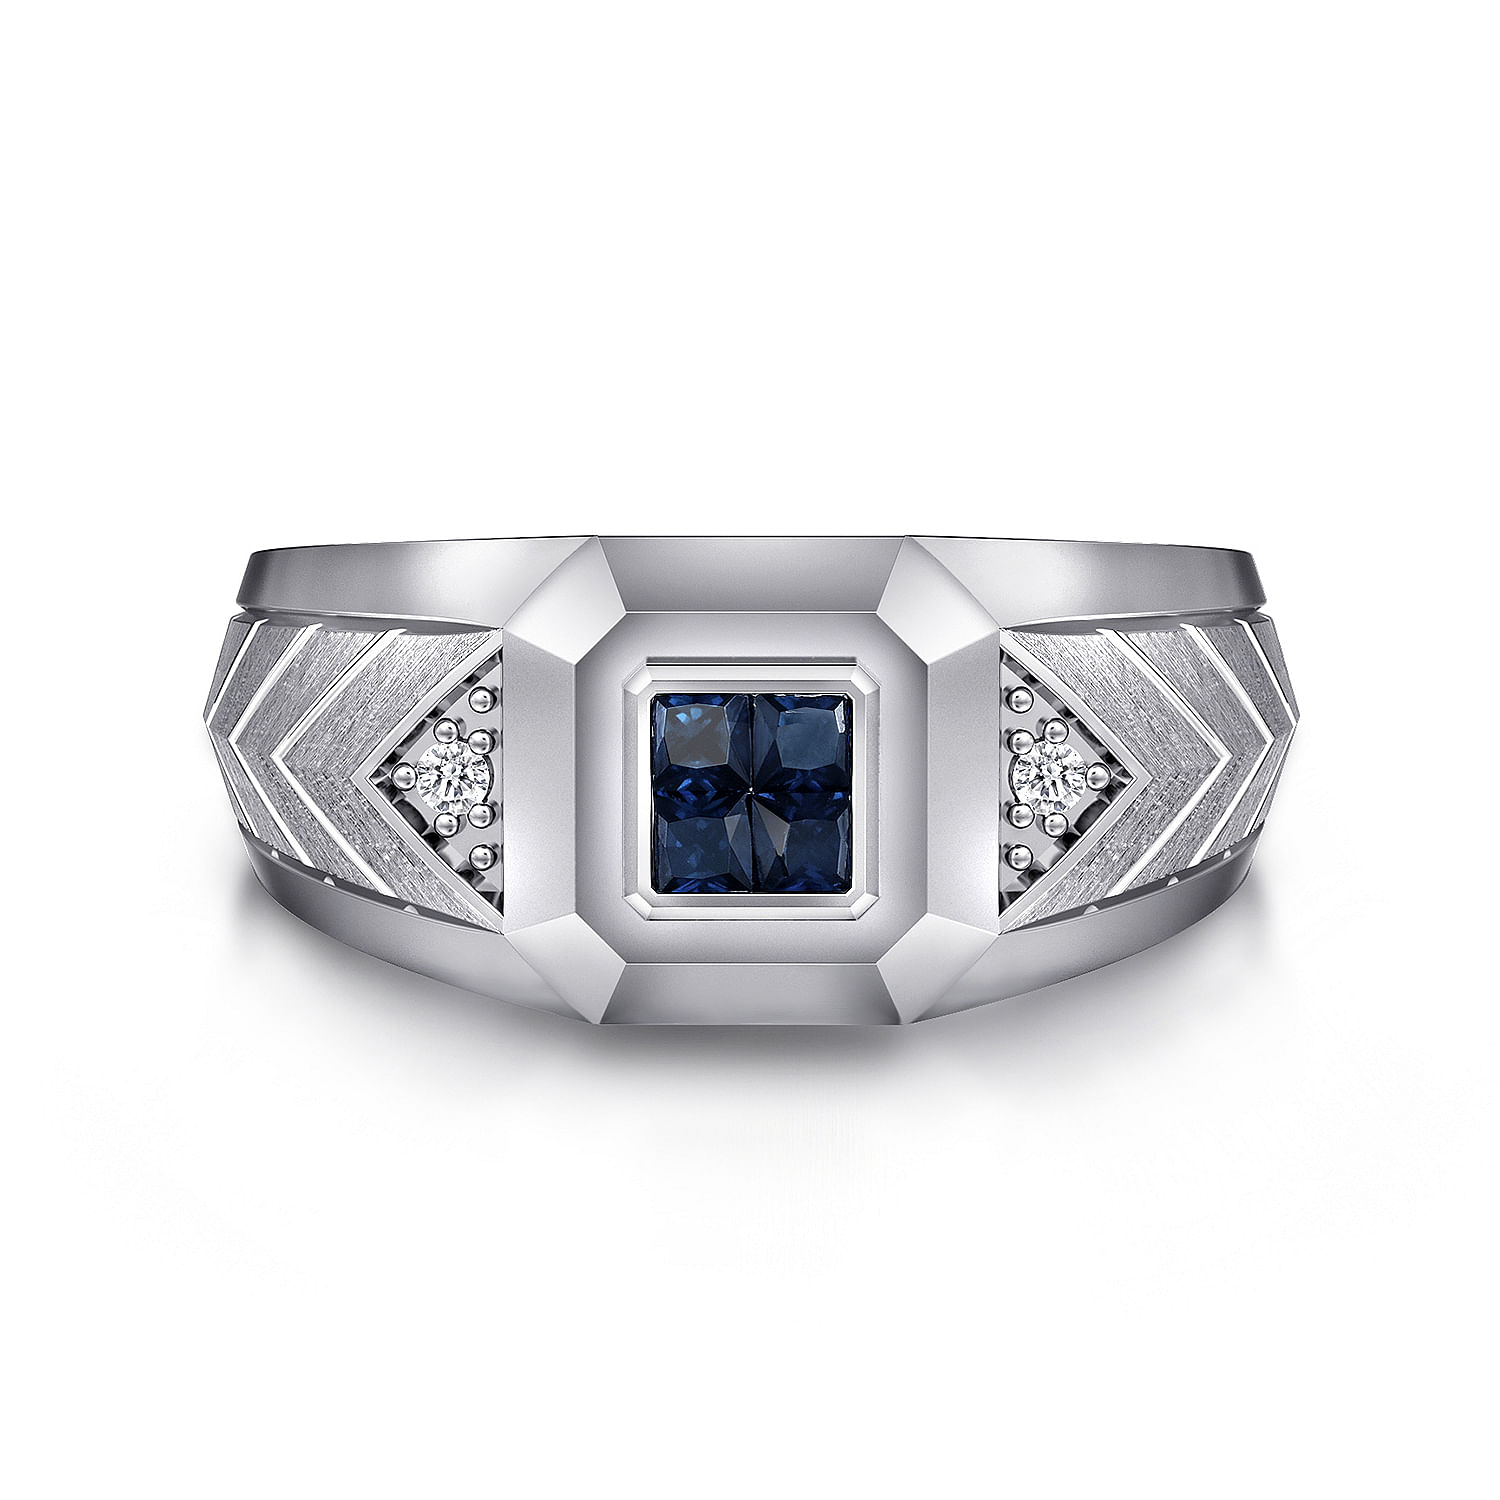 Wide 925 Sterling Silver Chevron Mens Ring with Sapphire in High Polished Finish